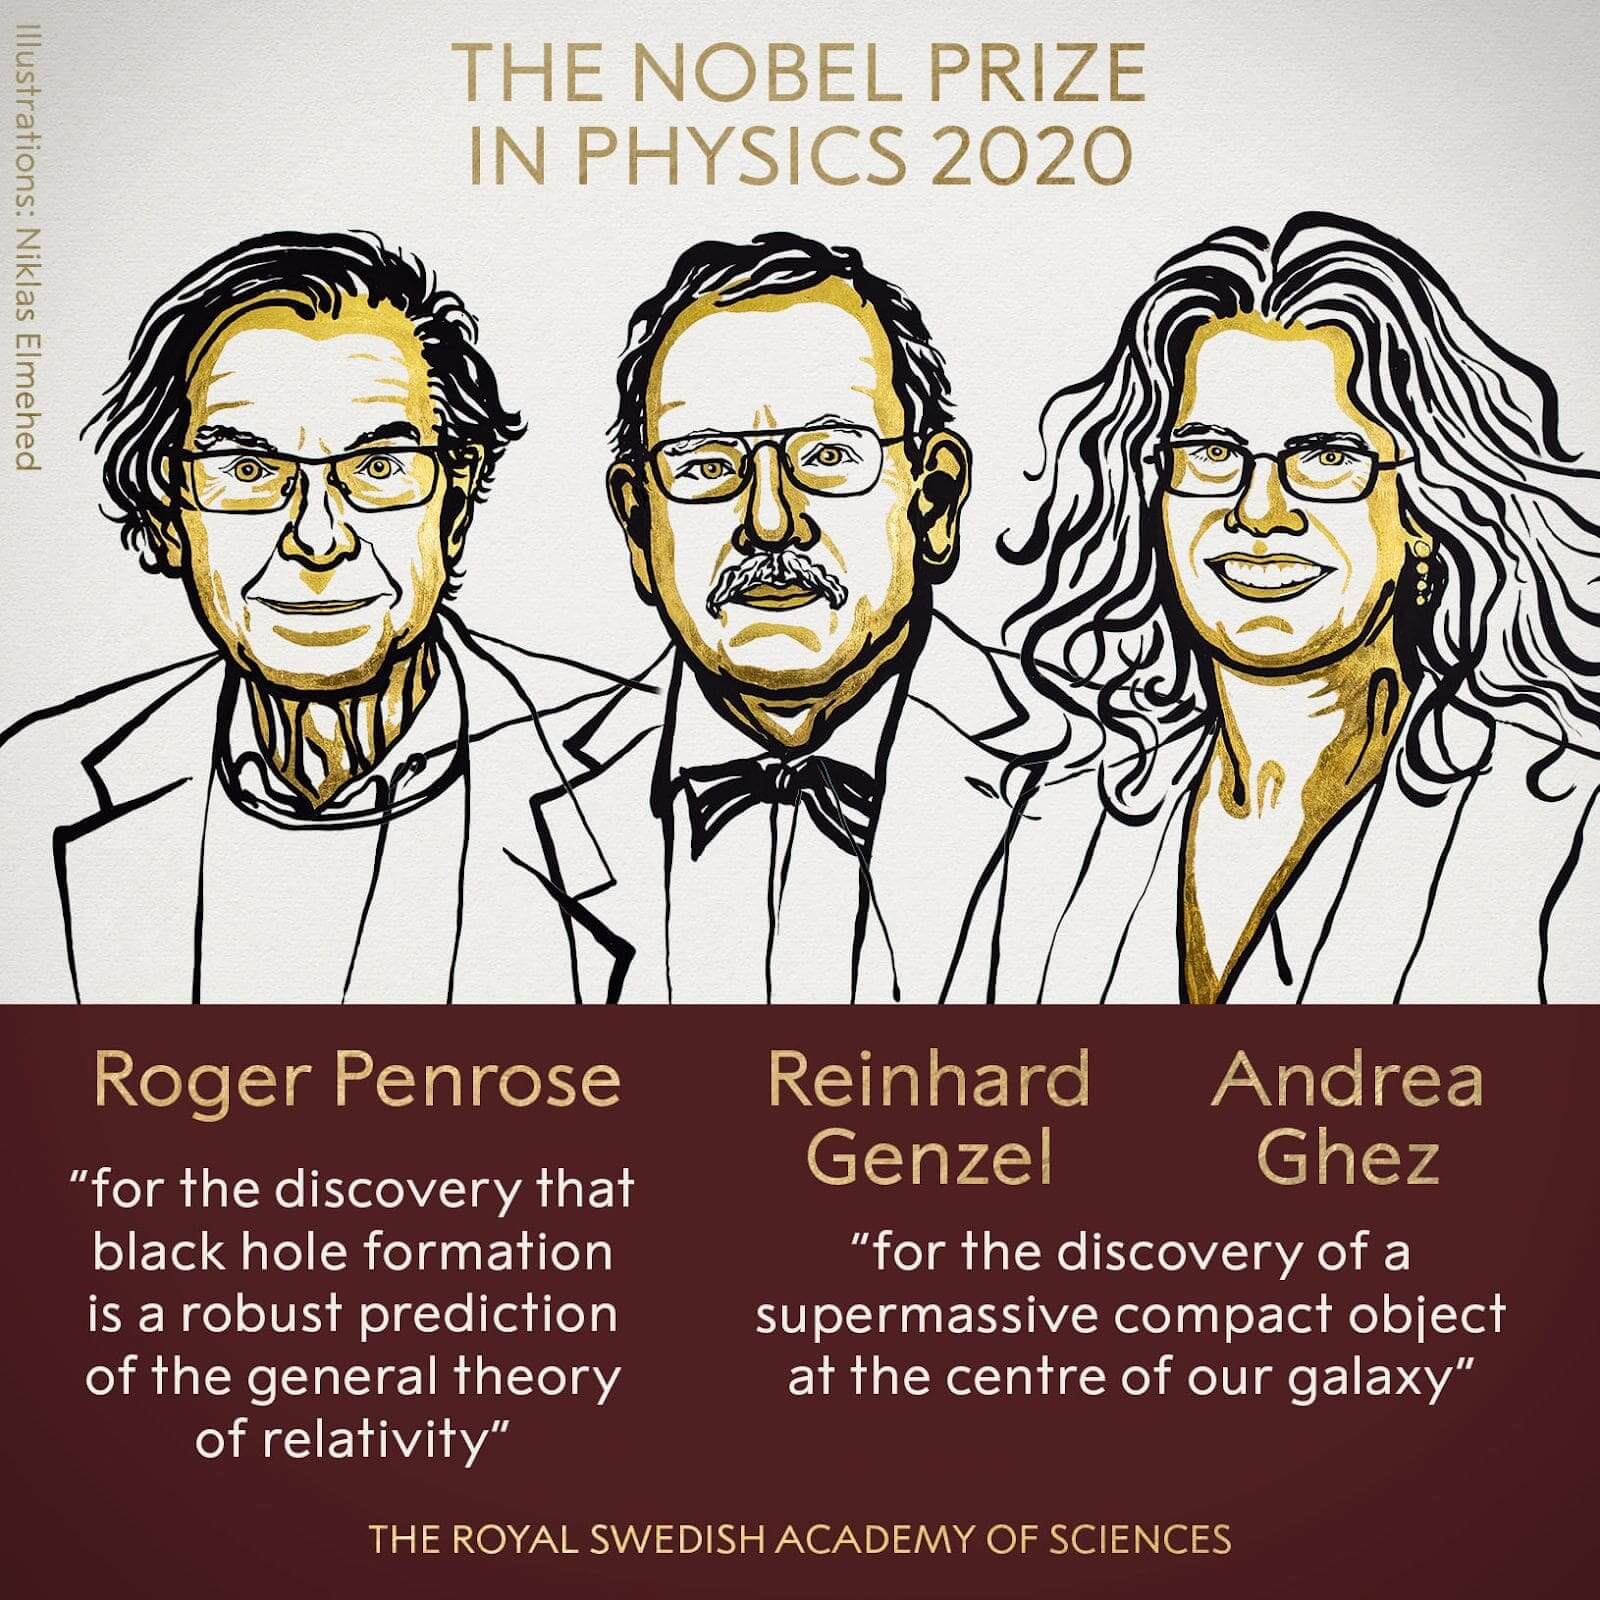 The Nobel Prize in Physics 2020